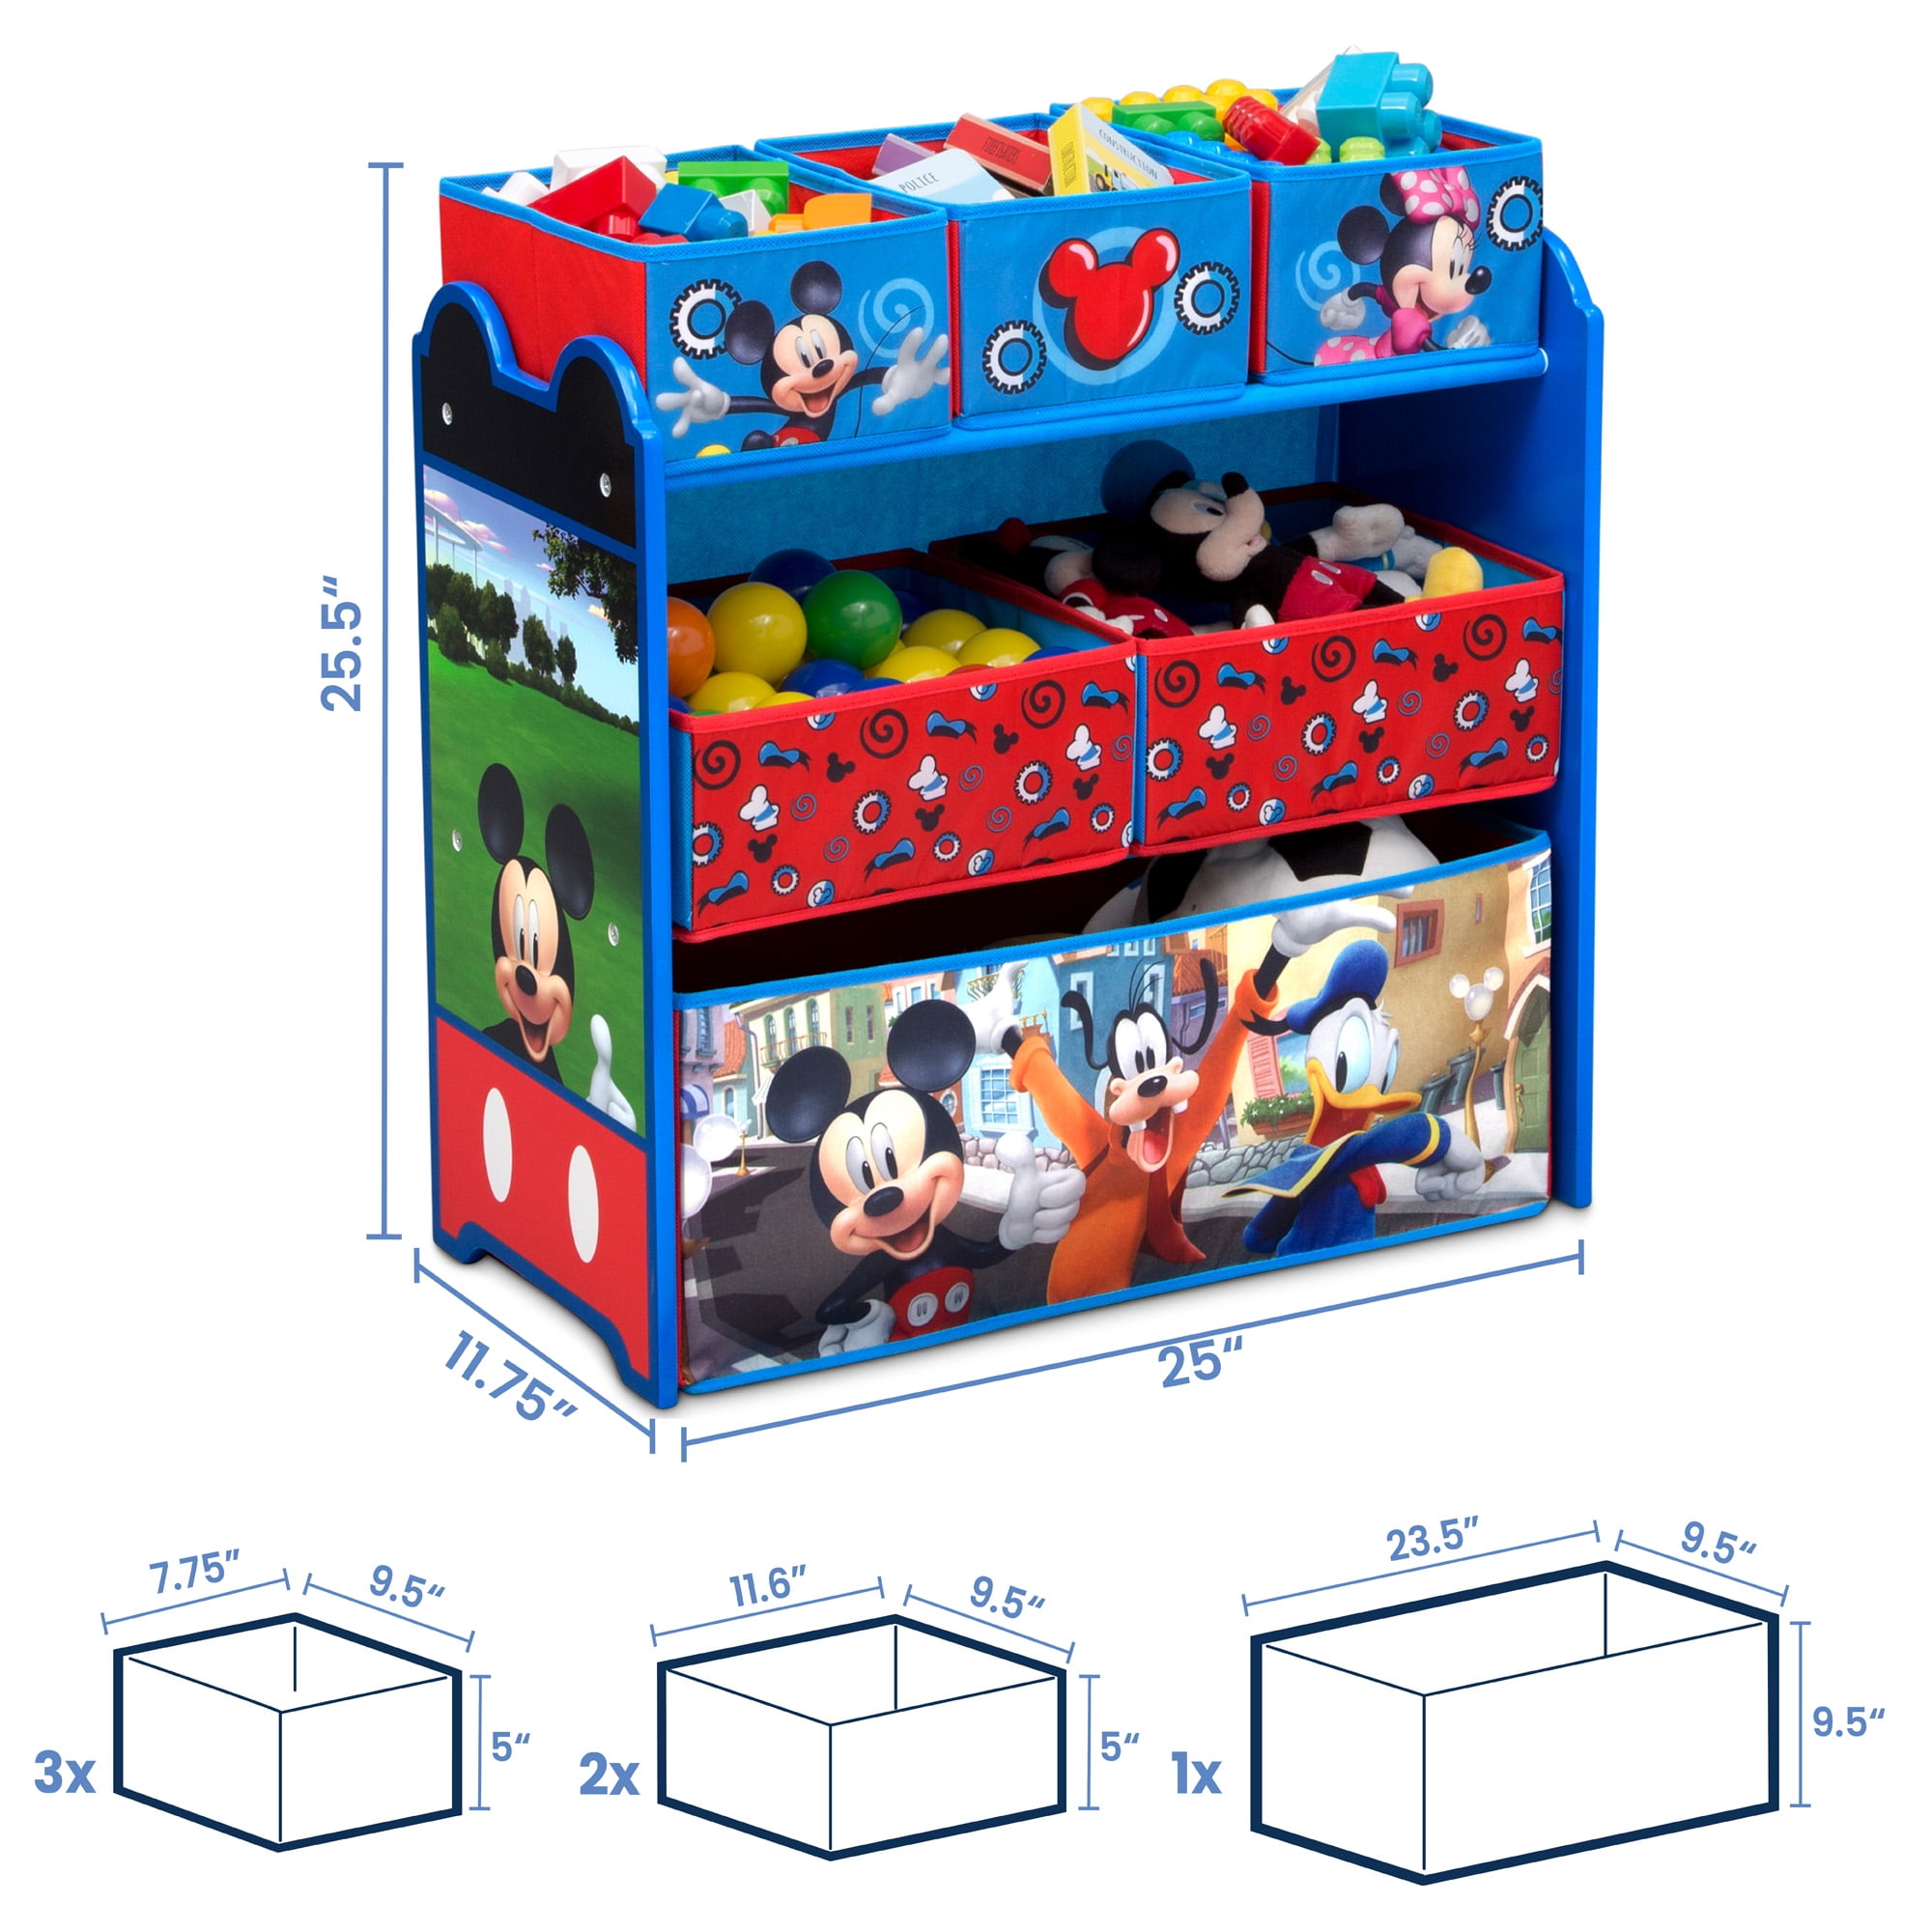 Details about   Mickey Mouse Blue Red Toy Box Organizer Storage Chest Bins Kids Playroom Bedroom 